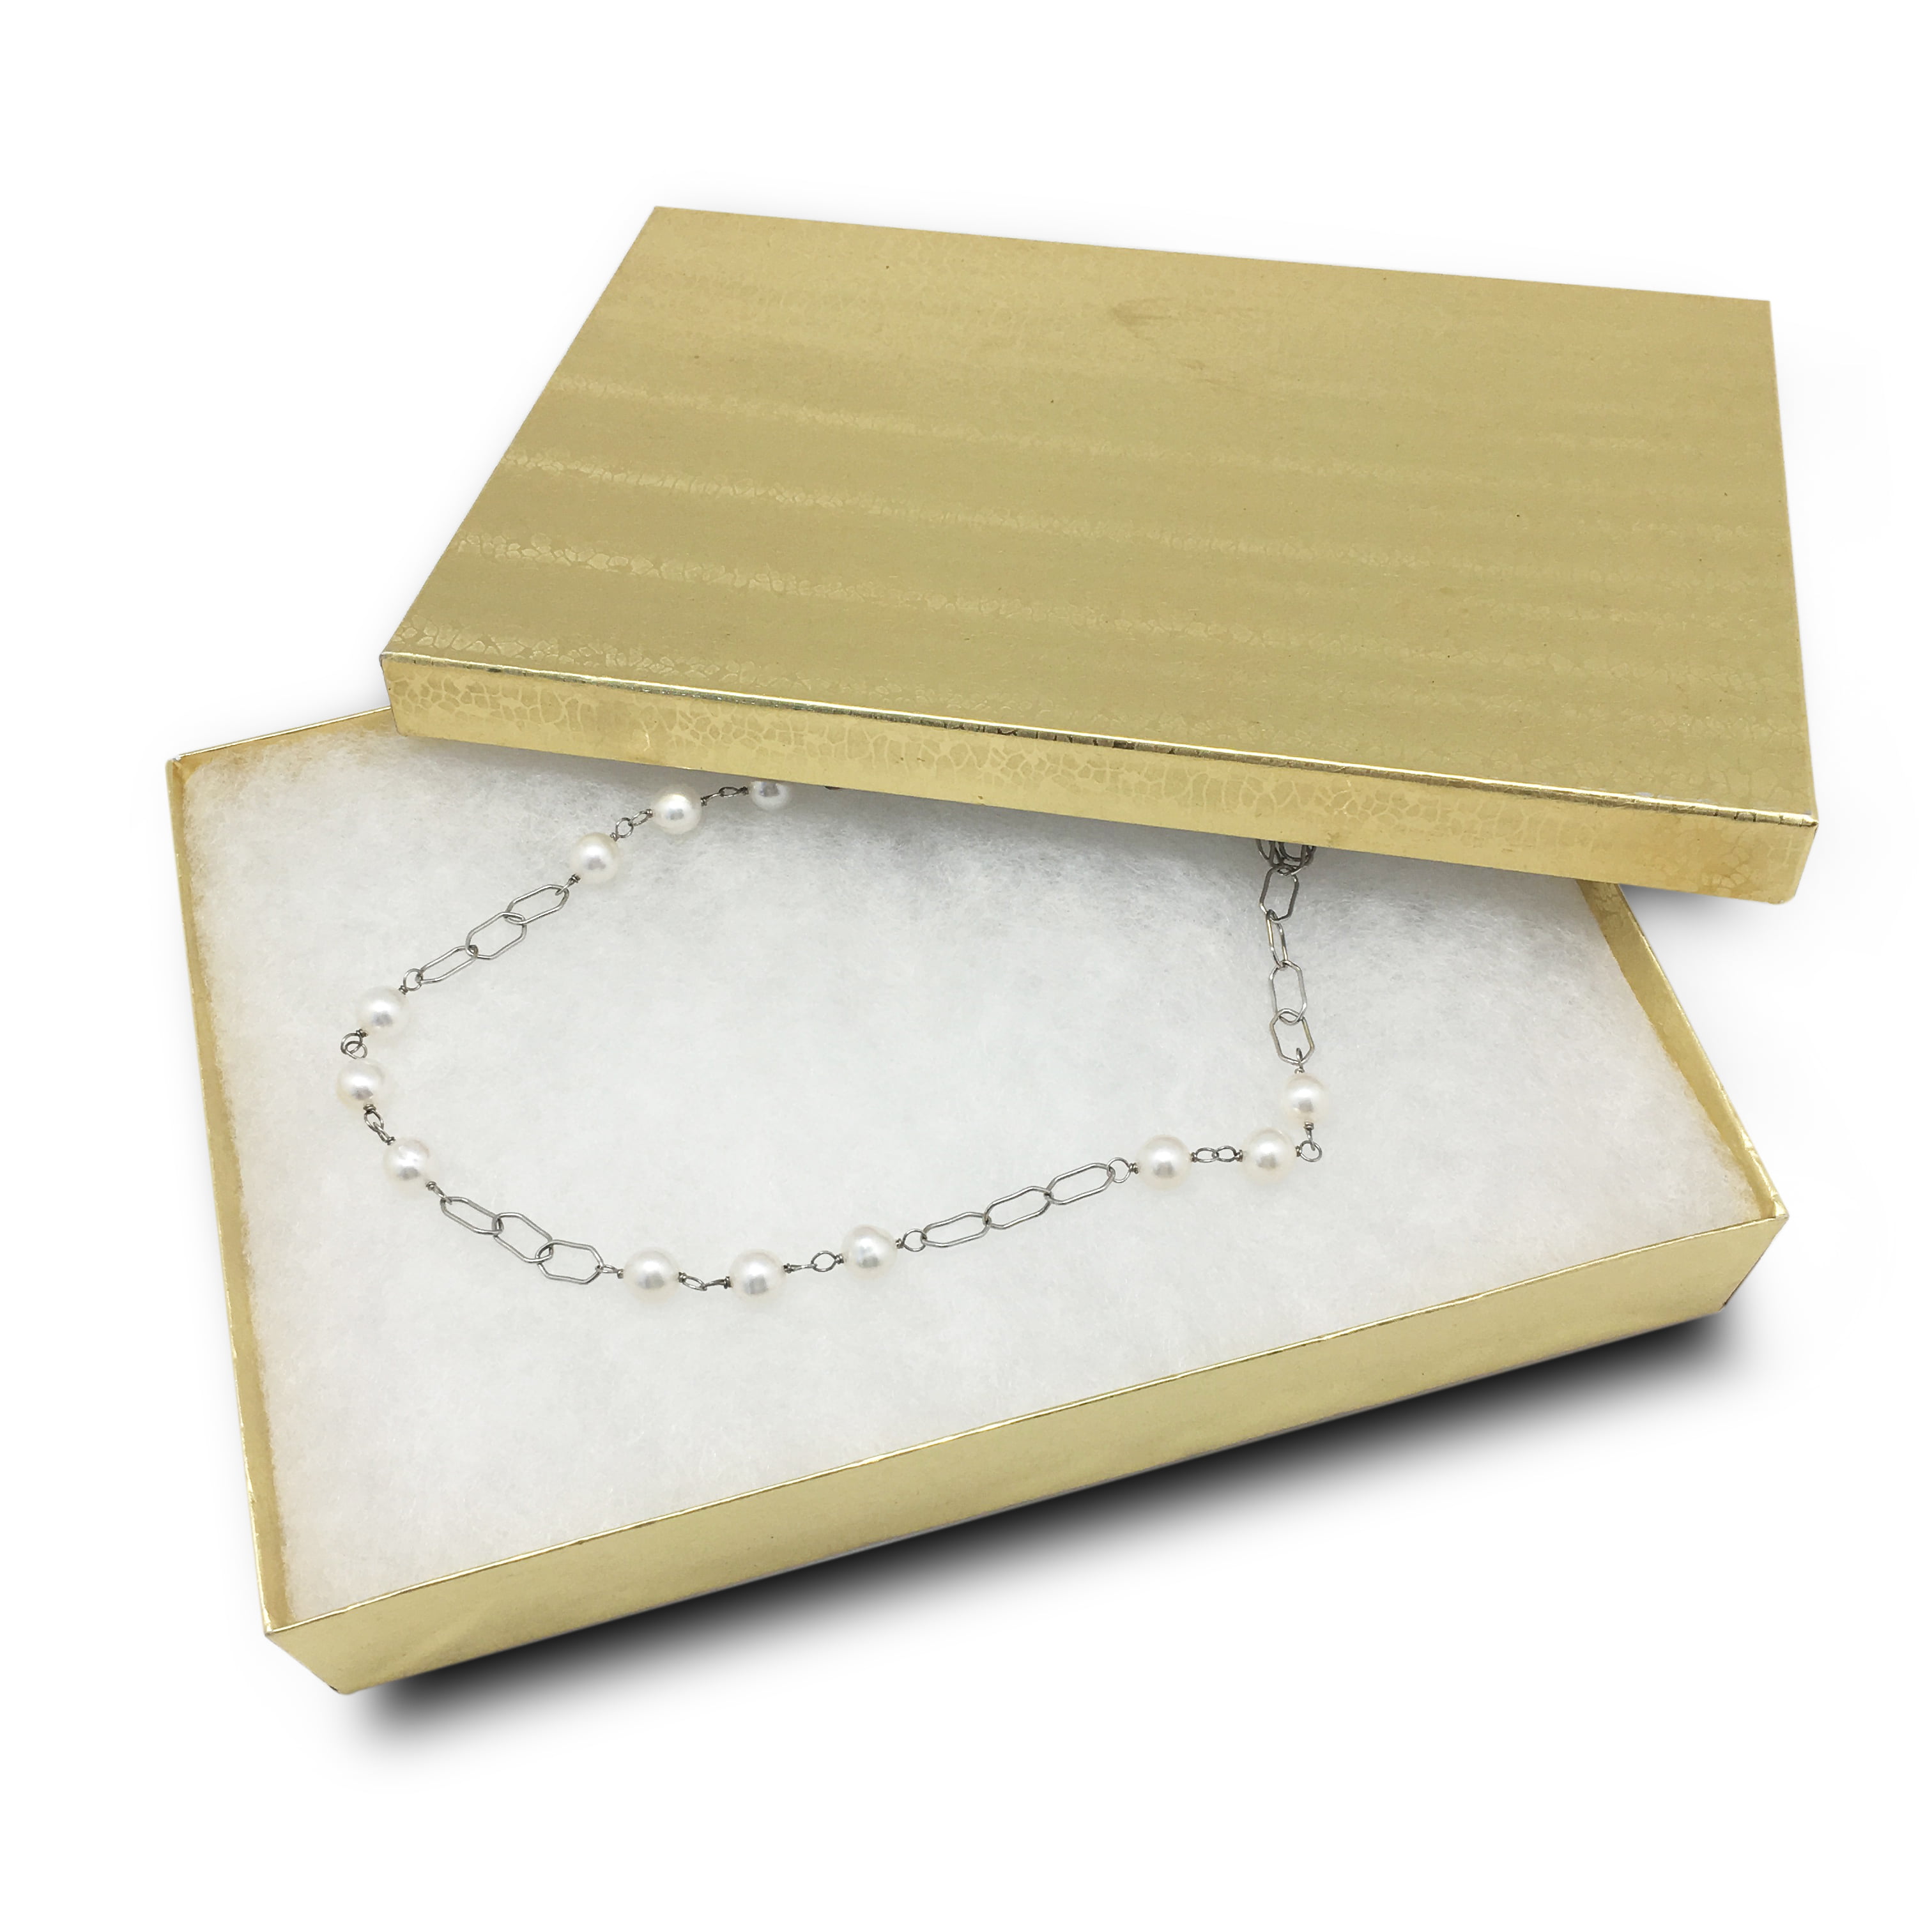 Cotton Filled Jewelry Boxes Pkg OF 20 Gold Foil 2 1/2" x 1 1/2" x 7/8" 